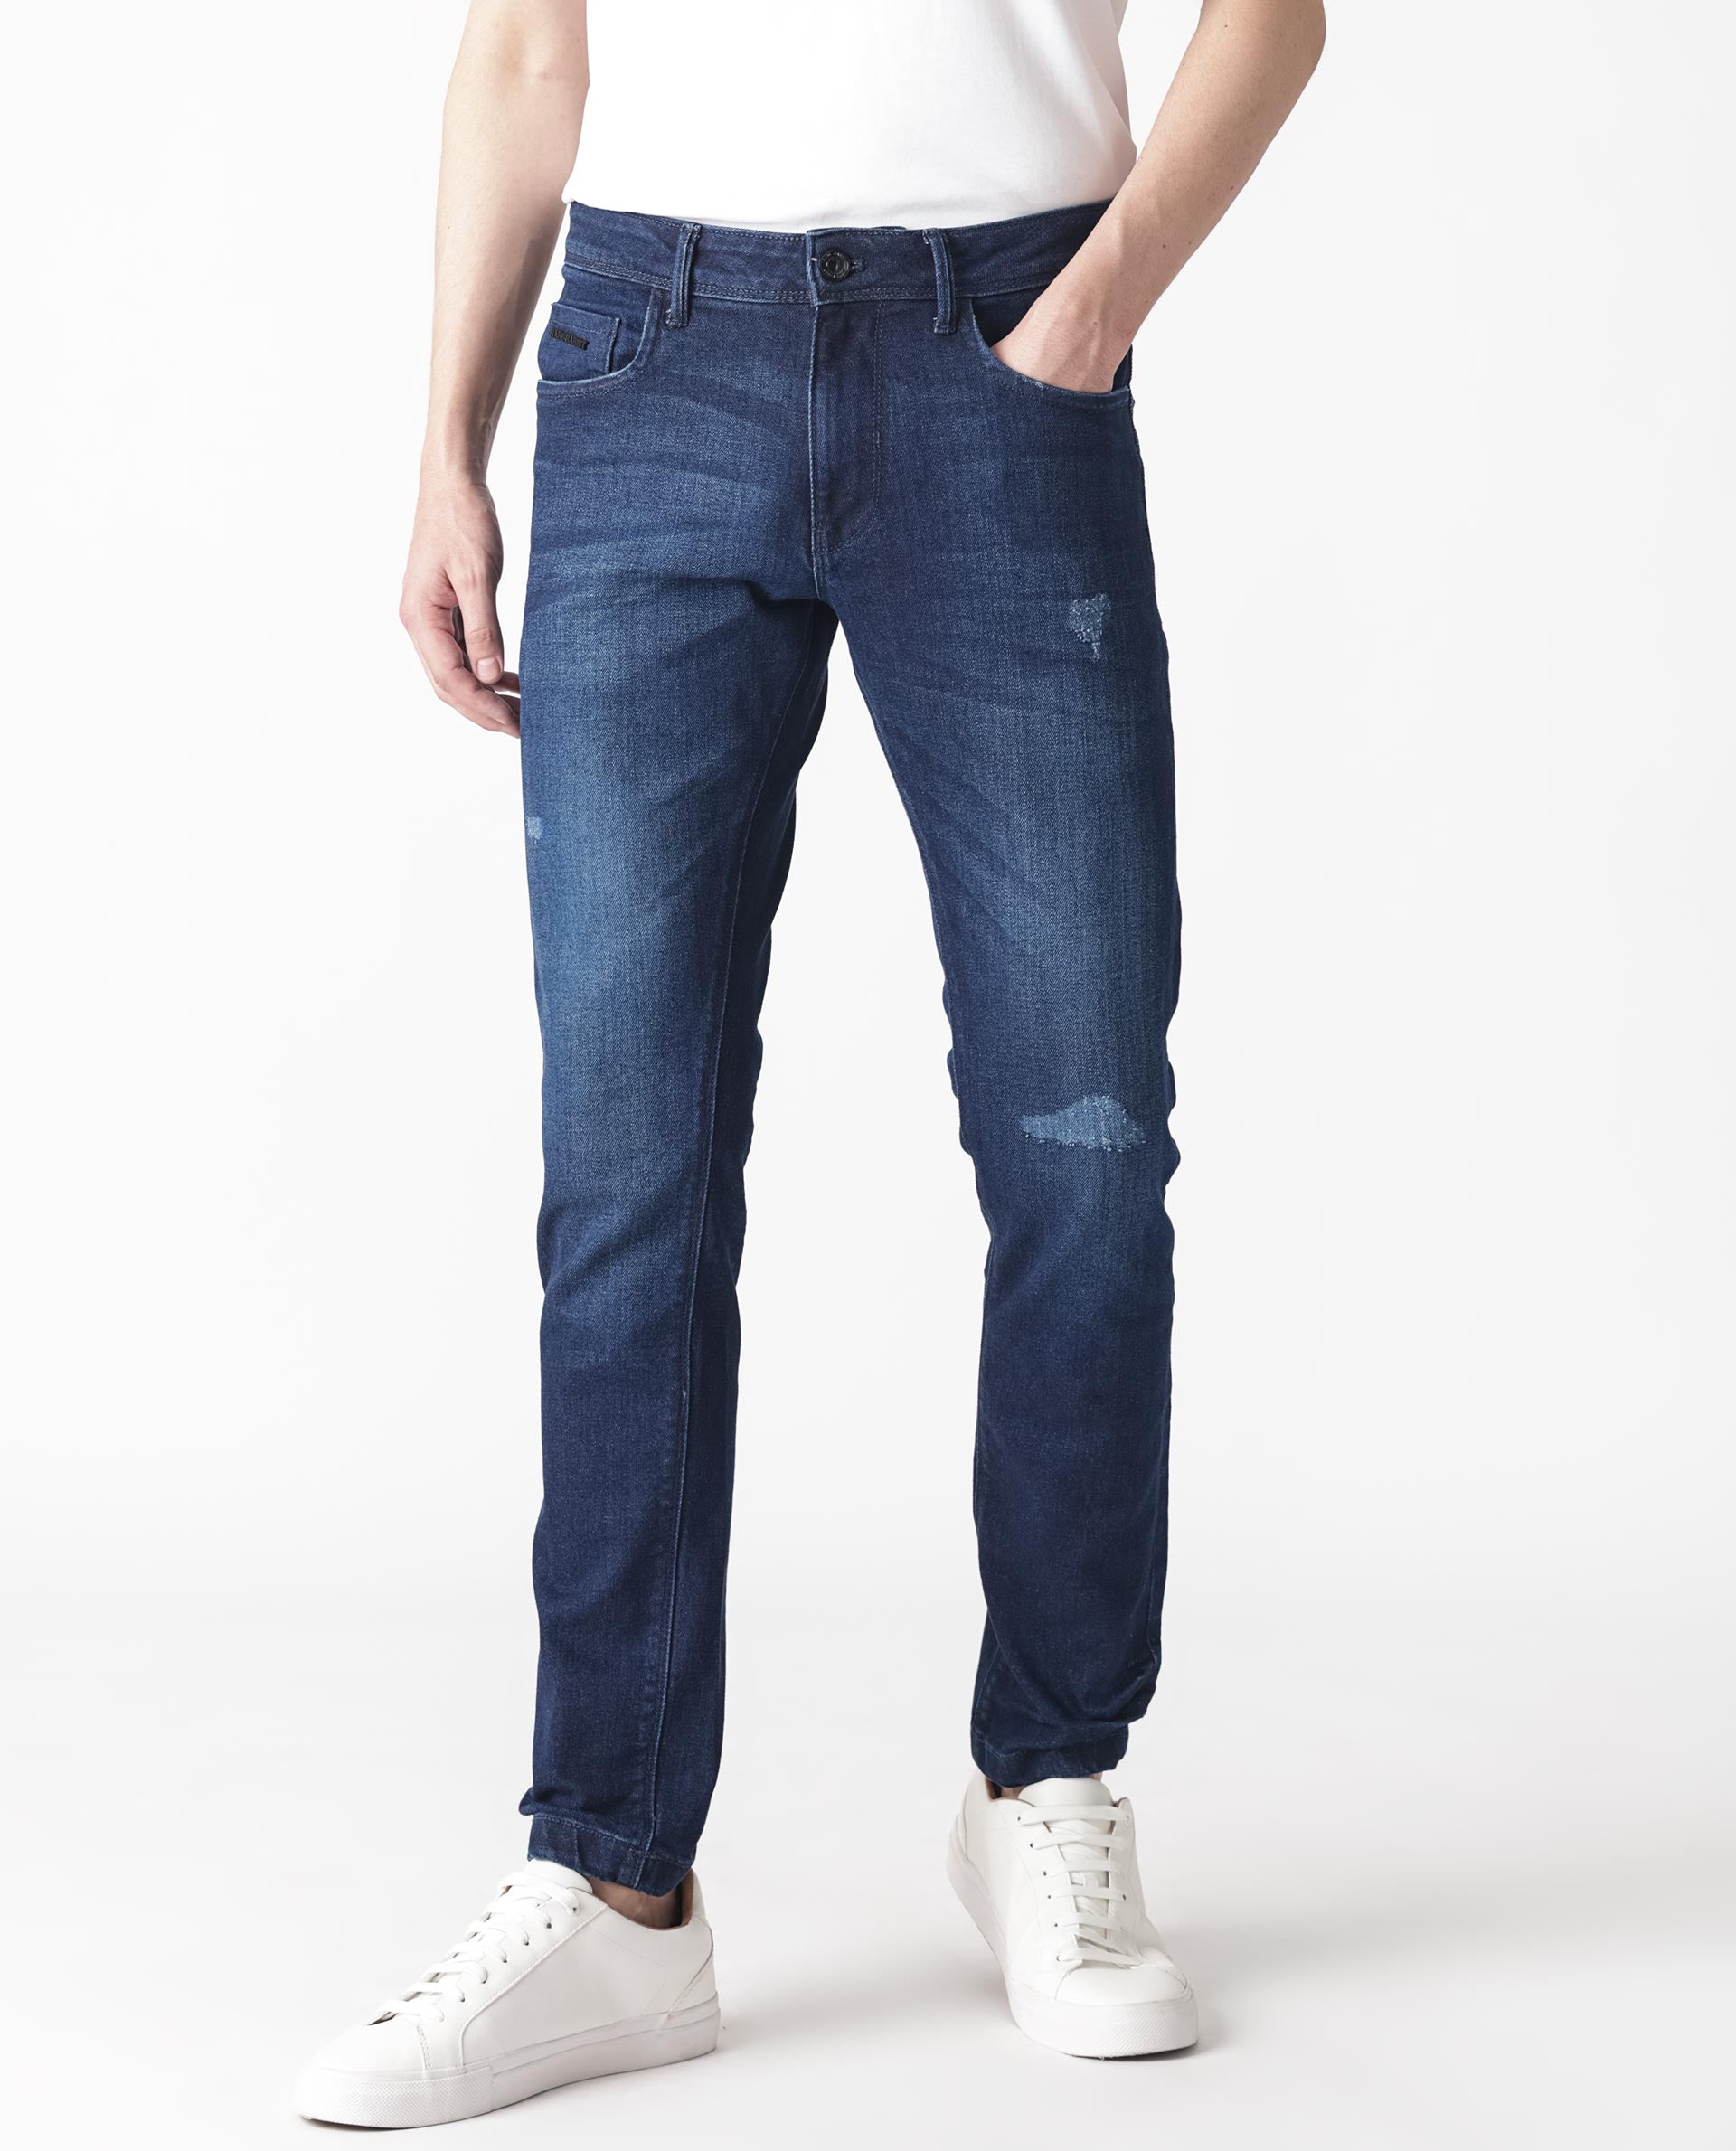 Buy Flying Machine Mid Rise Stone Wash Distressed Jeans - NNNOW.com